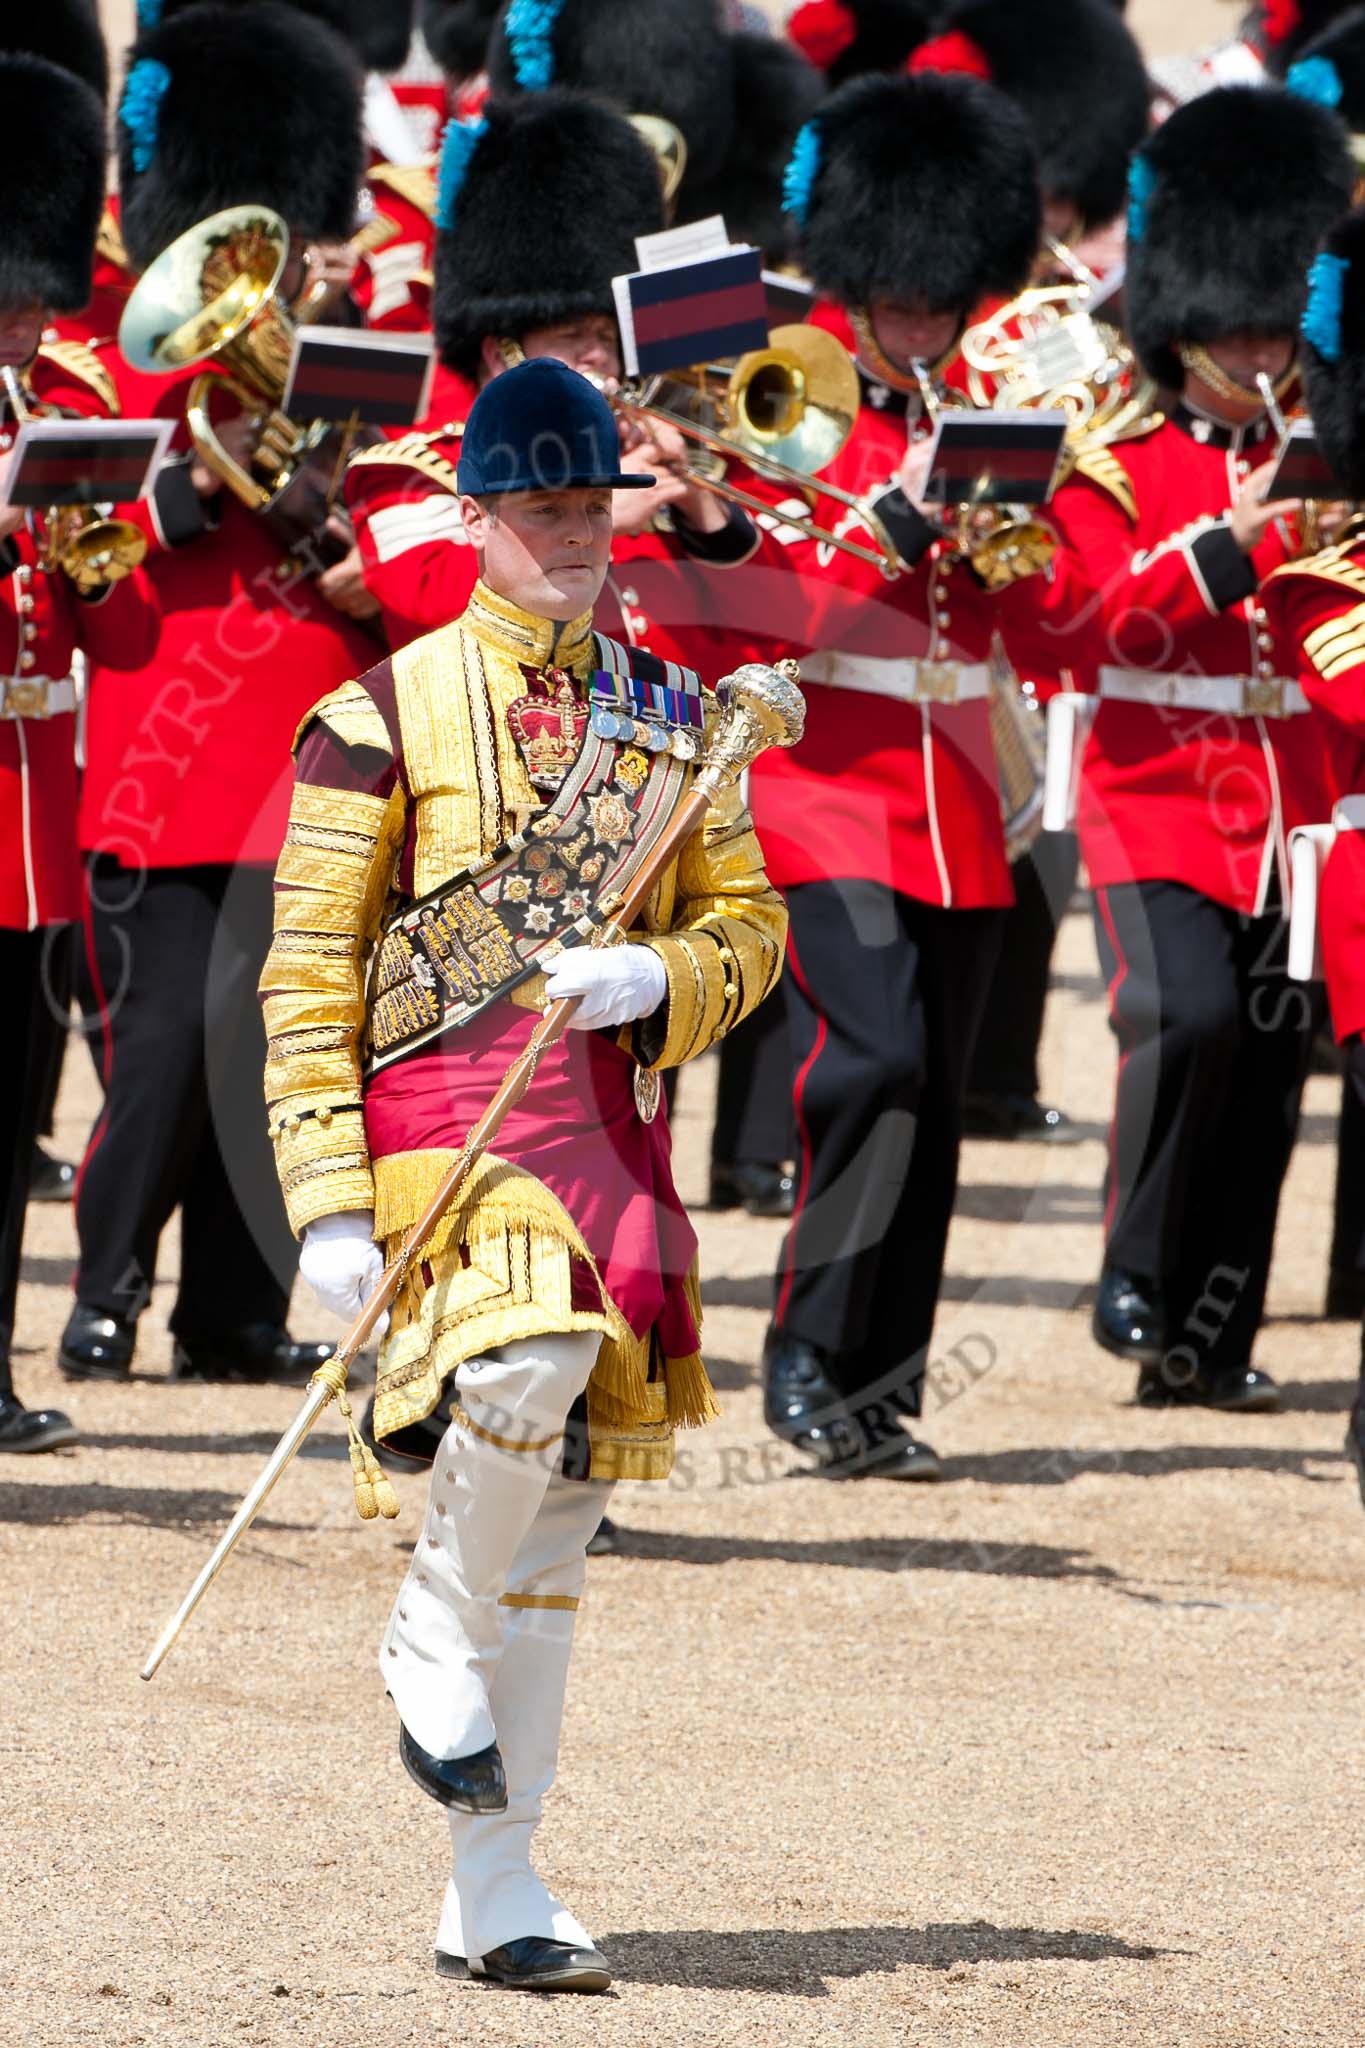 Trooping the Colour 2009: Senior Drum Major Tony Moors, Grenadier Guards..
Horse Guards Parade, Westminster,
London SW1,

United Kingdom,
on 13 June 2009 at 11:36, image #209